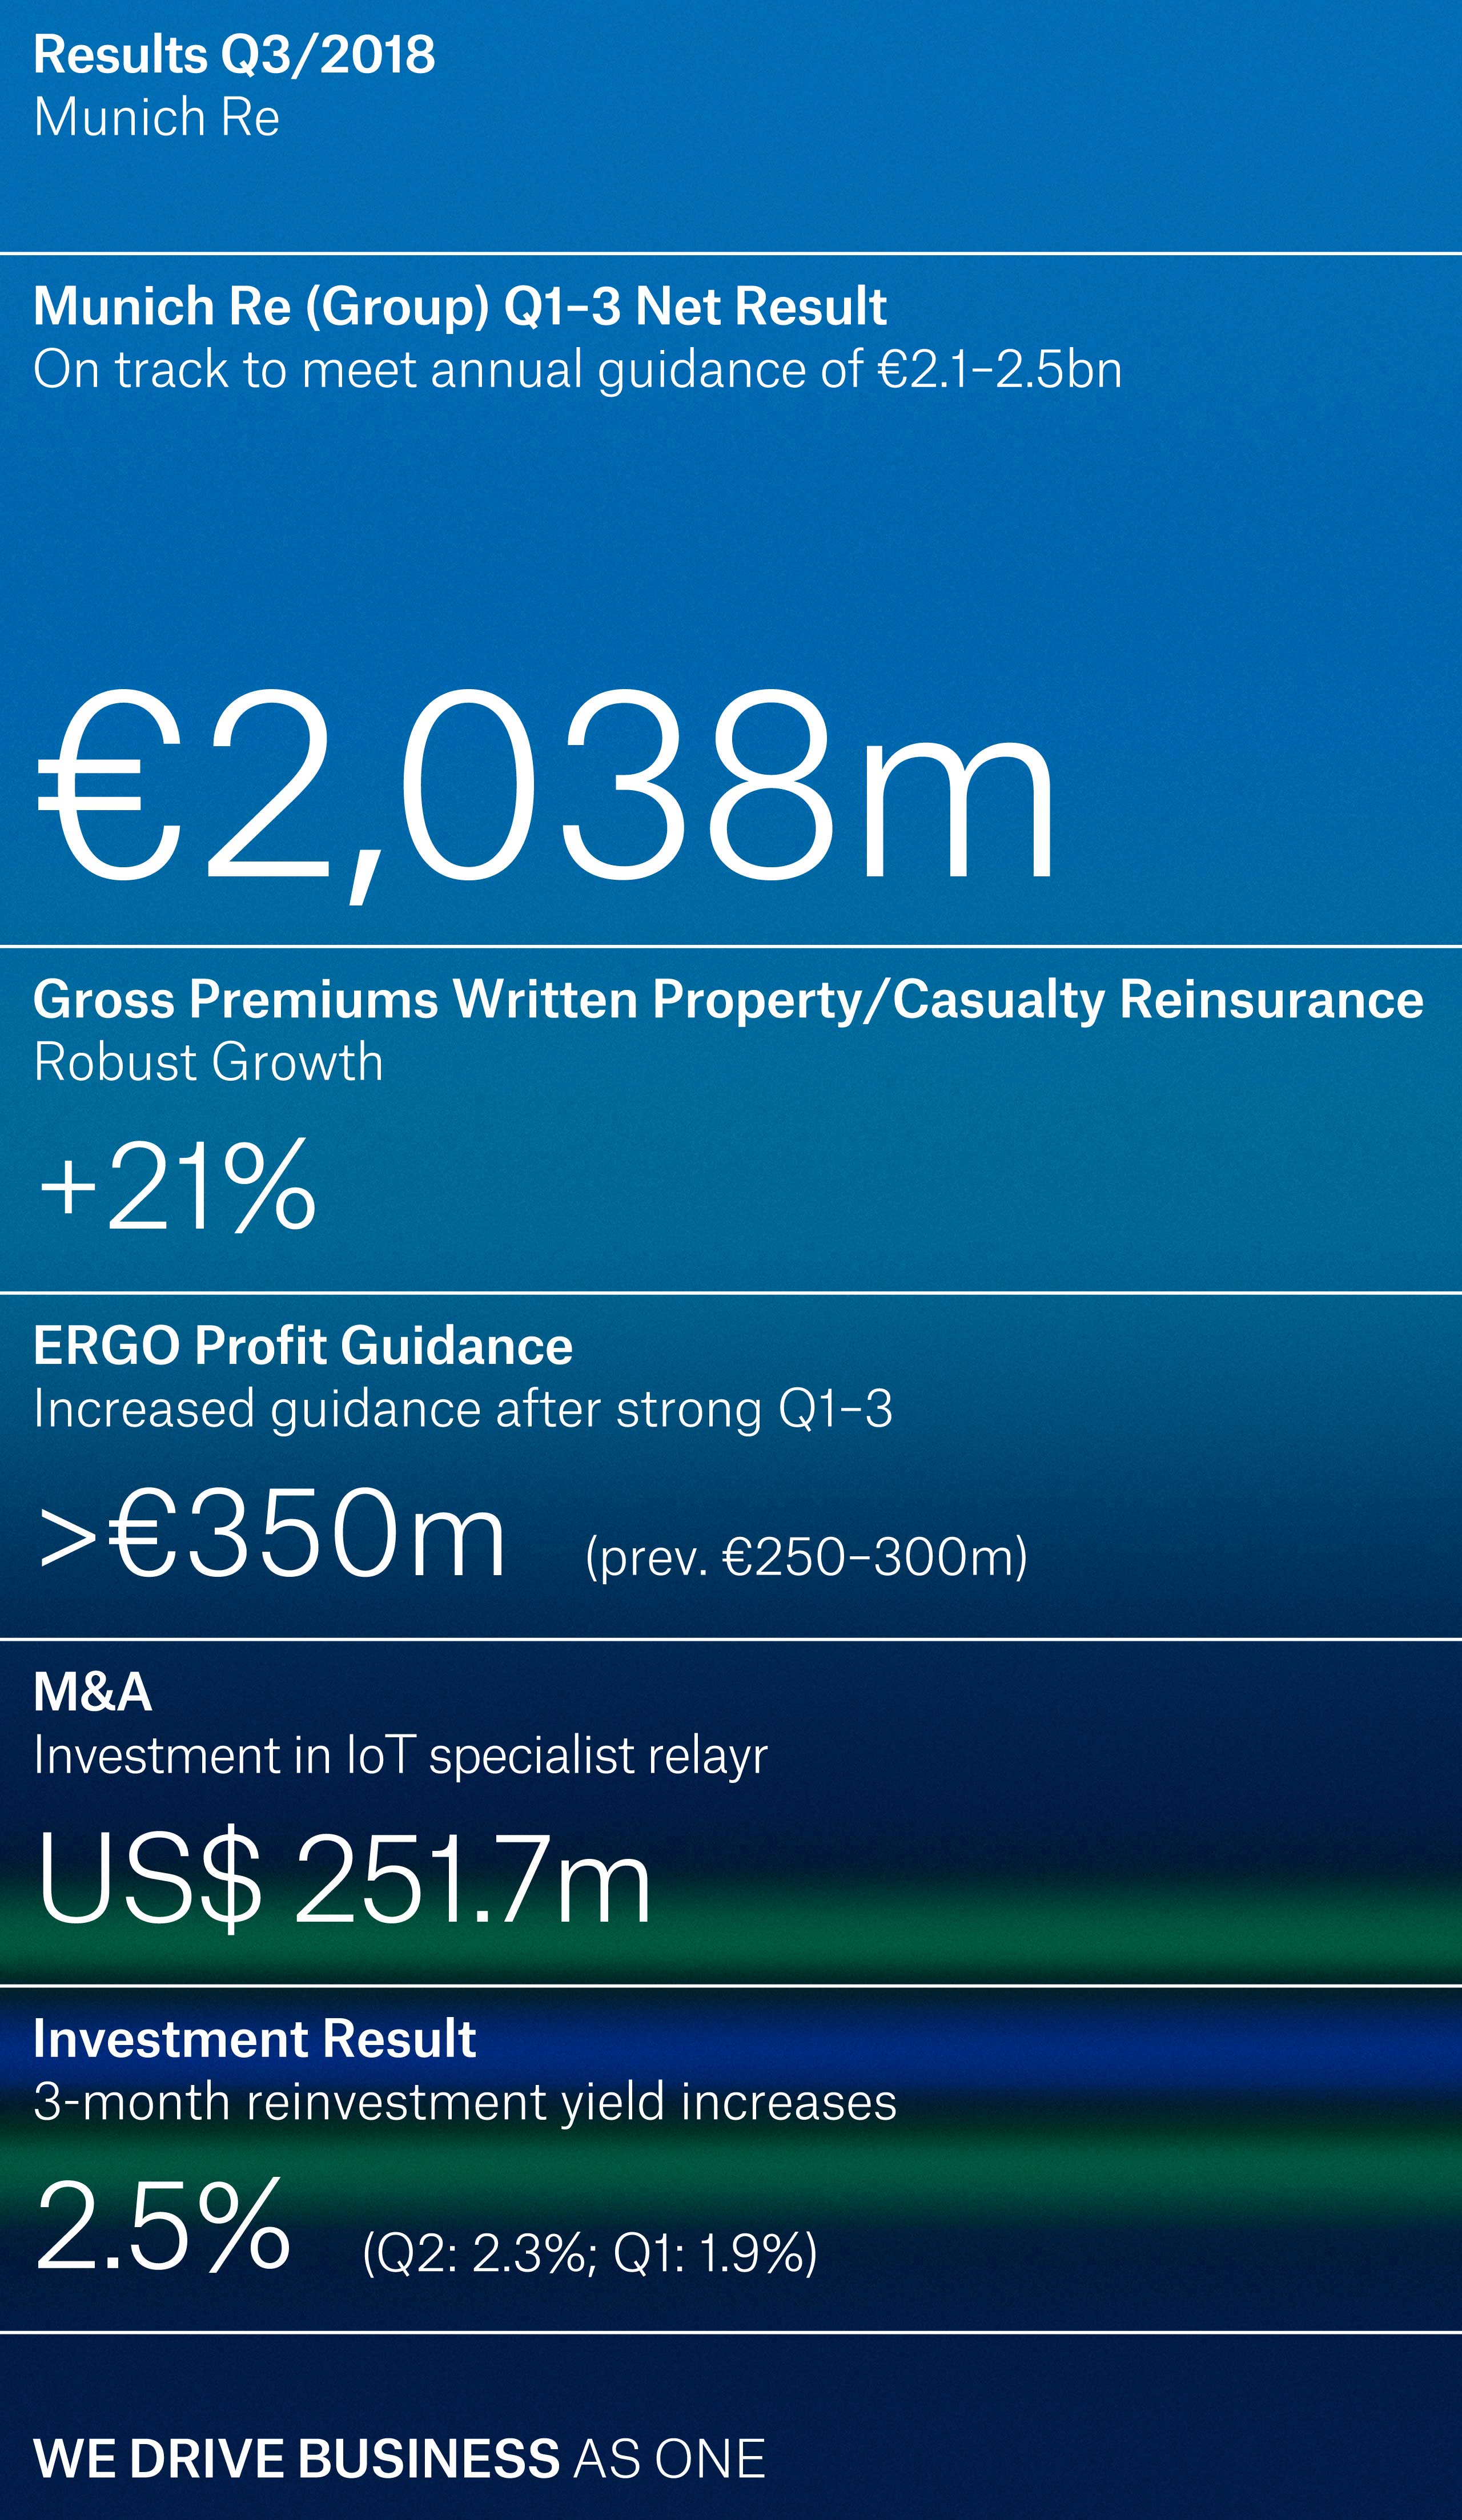 In Q1–3, Munich Re posted a profit of €2,038m and is thus on track to achieve its profit target of €2.1–2.5bn